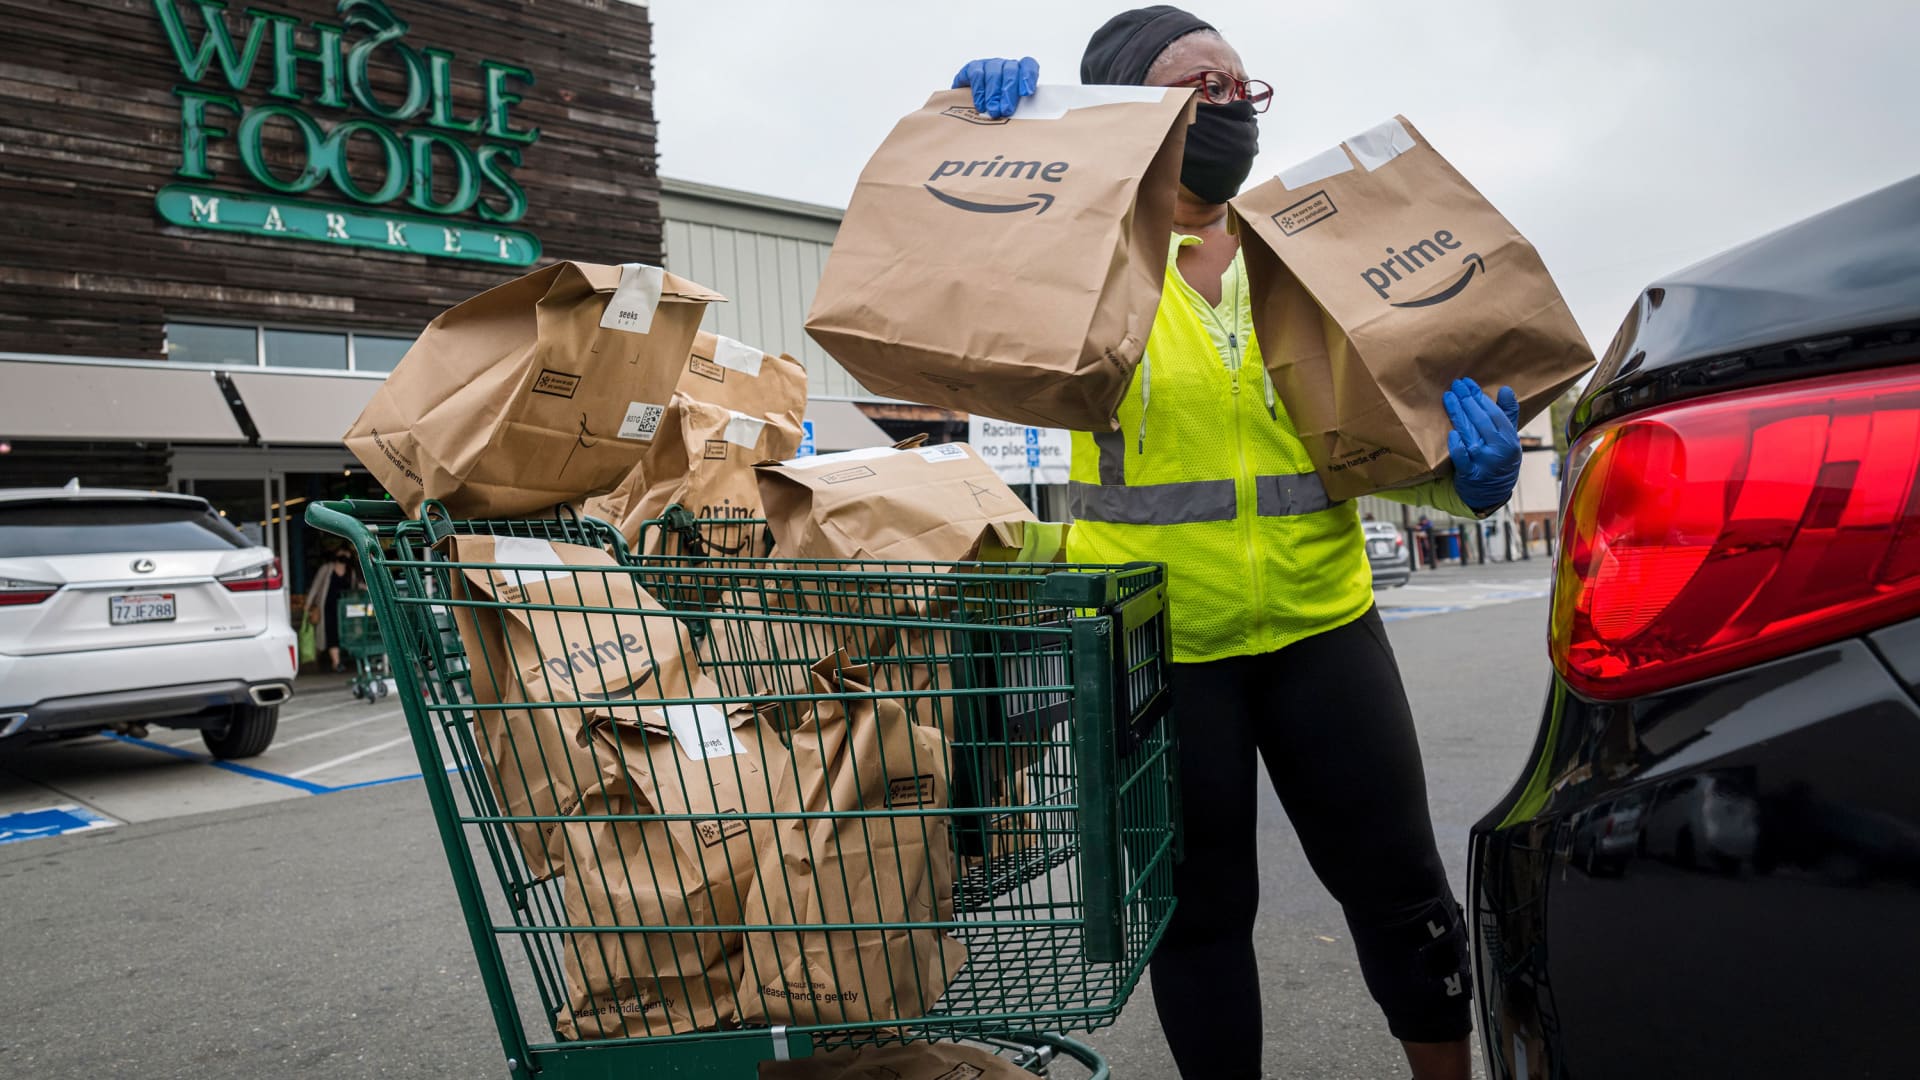 Amazon tests grocery subscription service for Prime members